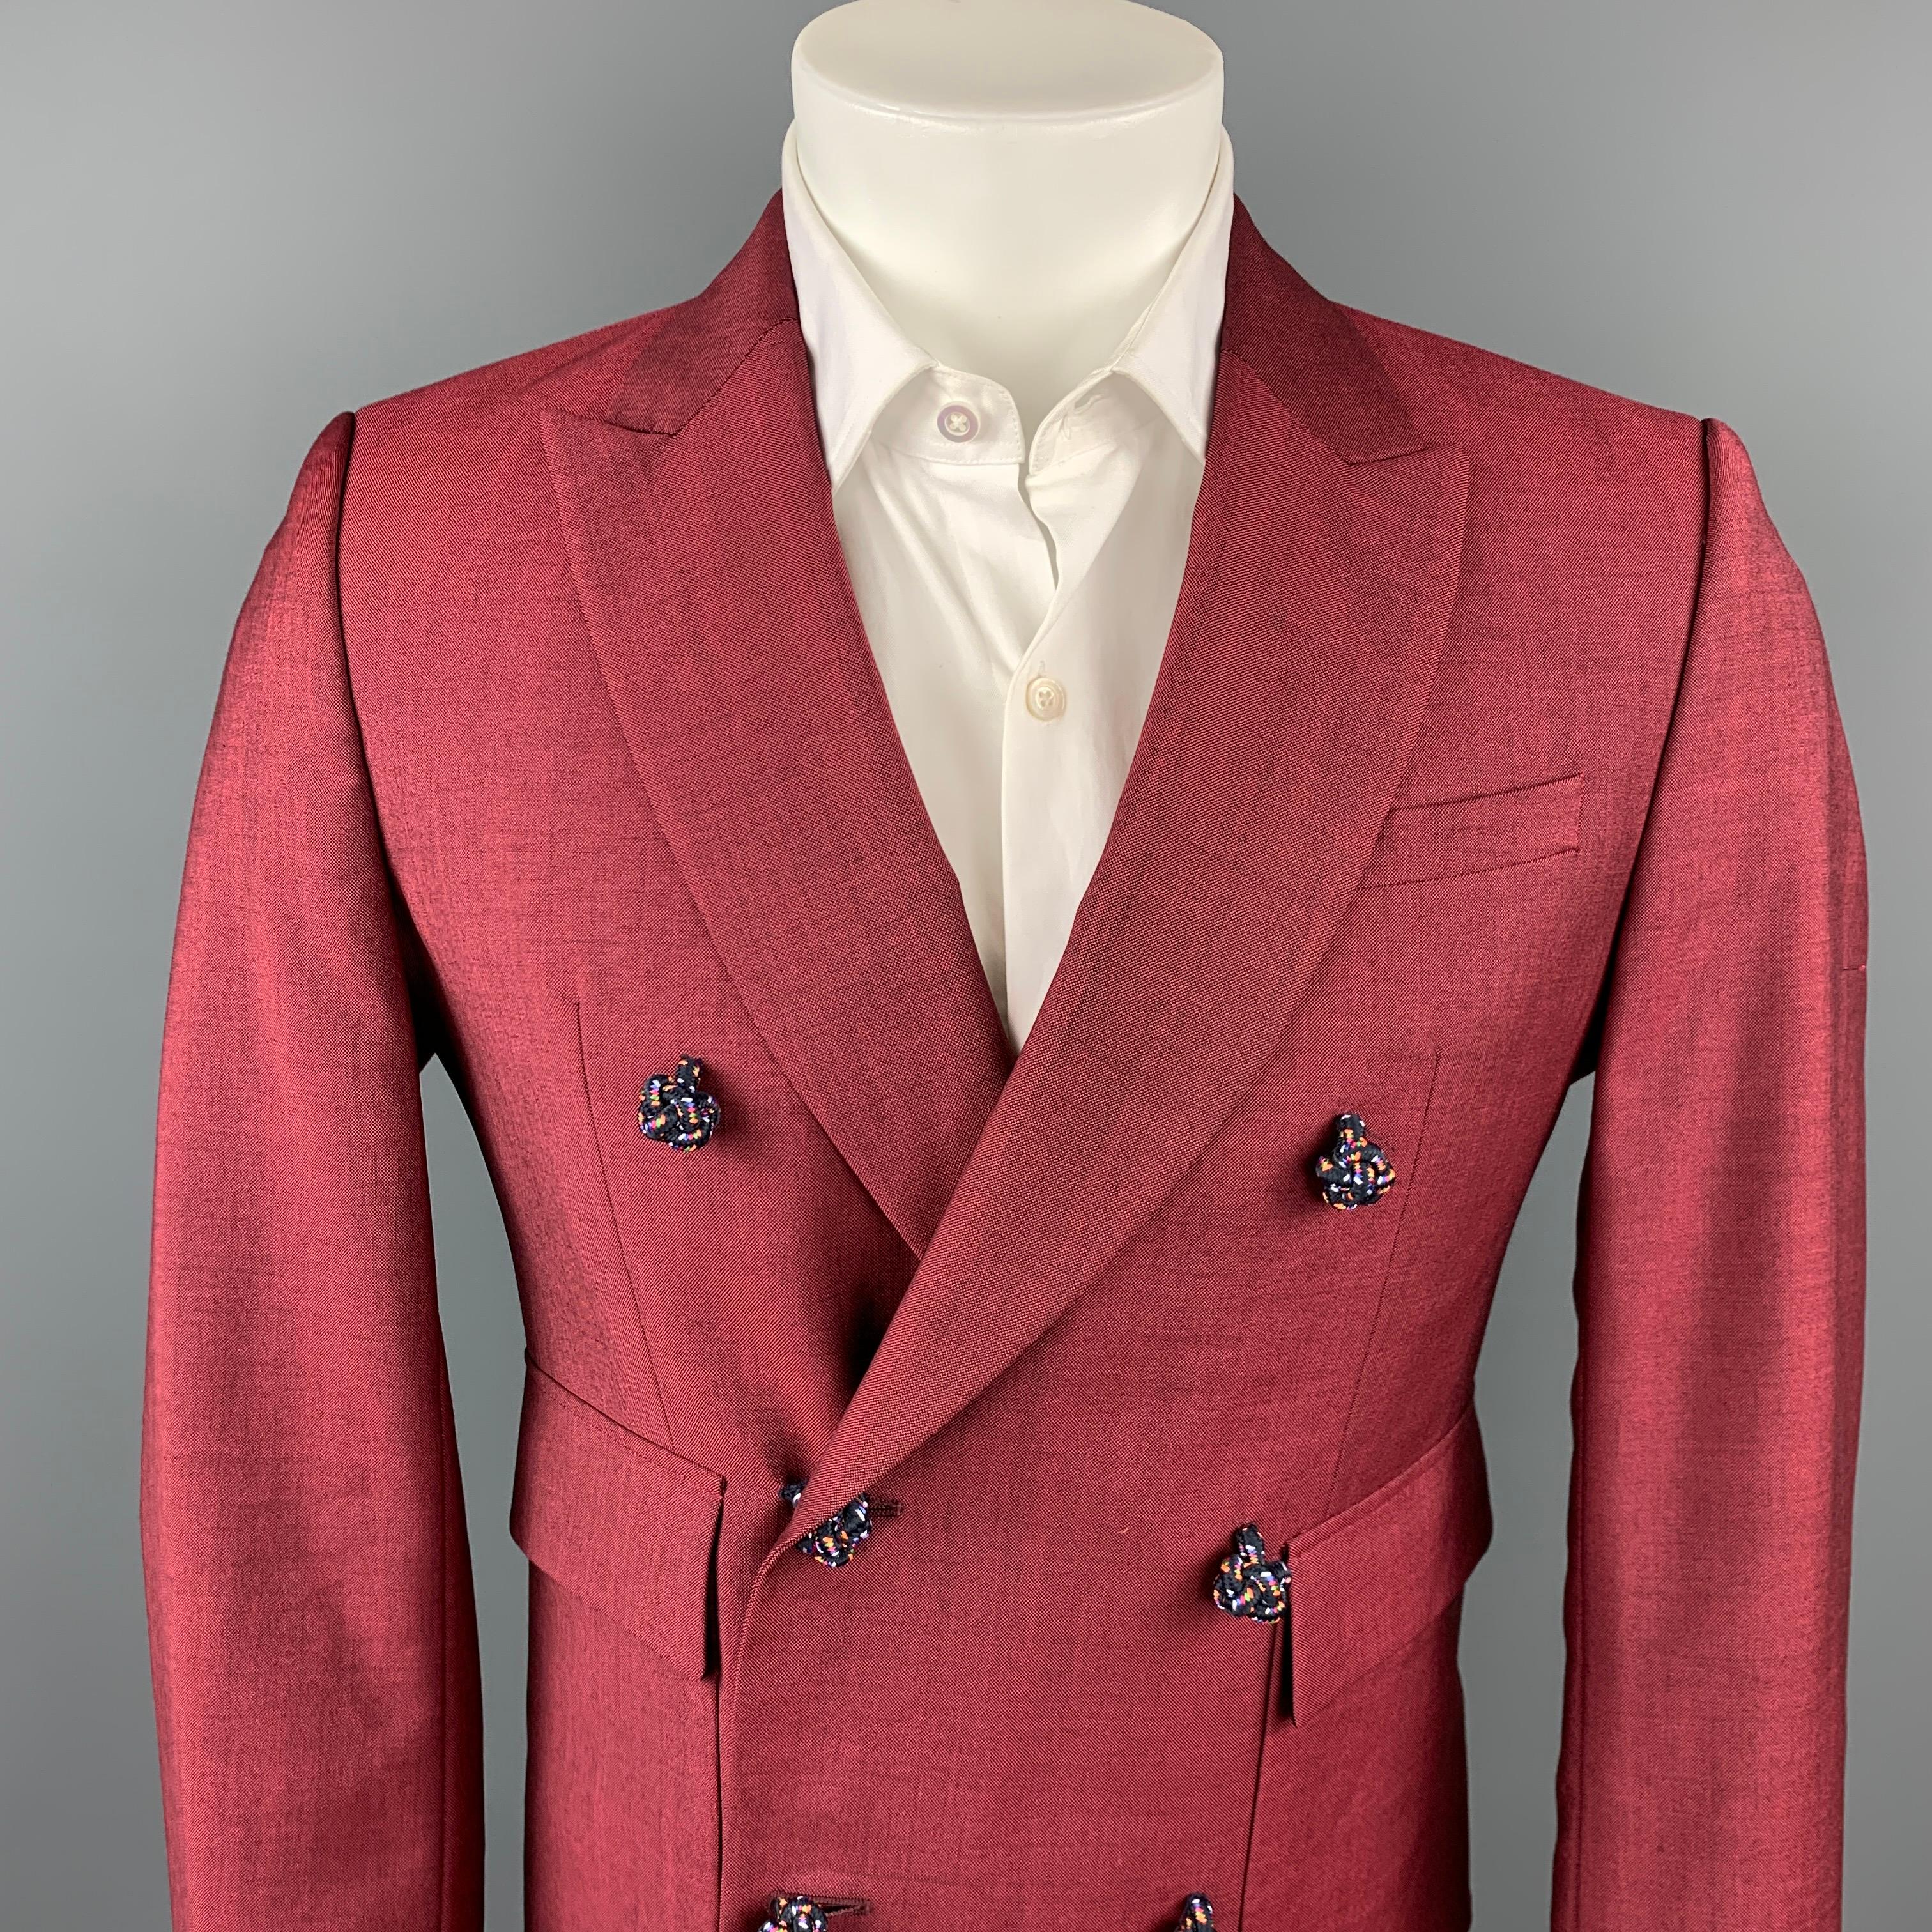 KRIS VAN ASSCHE sport coat comes in a burgundy viscose blend with a full liner featuring a peak lapel, flap pockets, silk knot button details, and a double breasted closure.

Very Good Pre-Owned Condition.
Marked: 46

Measurements:

Shoulder: 17